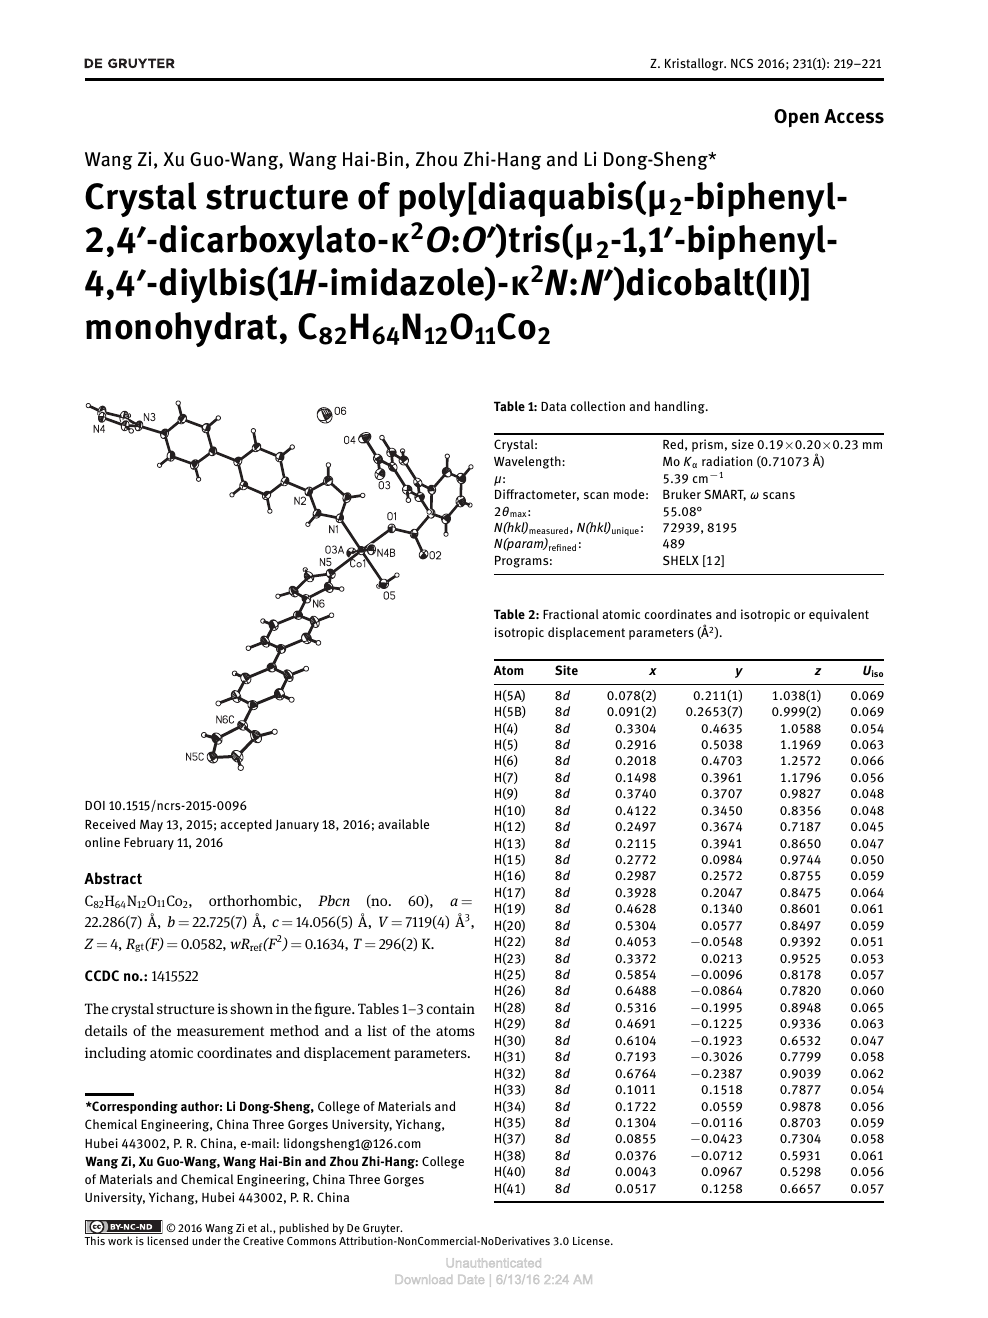 Crystal Structure Of Poly Diaquabis M2 Biphenyl 2 4 Dicarboxylato K2o O Tris M2 1 1 Biphenyl 4 4 Diylbis 1h Imidazole K2n N Dicobalt Ii Monohydrat Ch64n12o11co2 Topic Of Research Paper In Chemical Sciences Download Scholarly Article Pdf